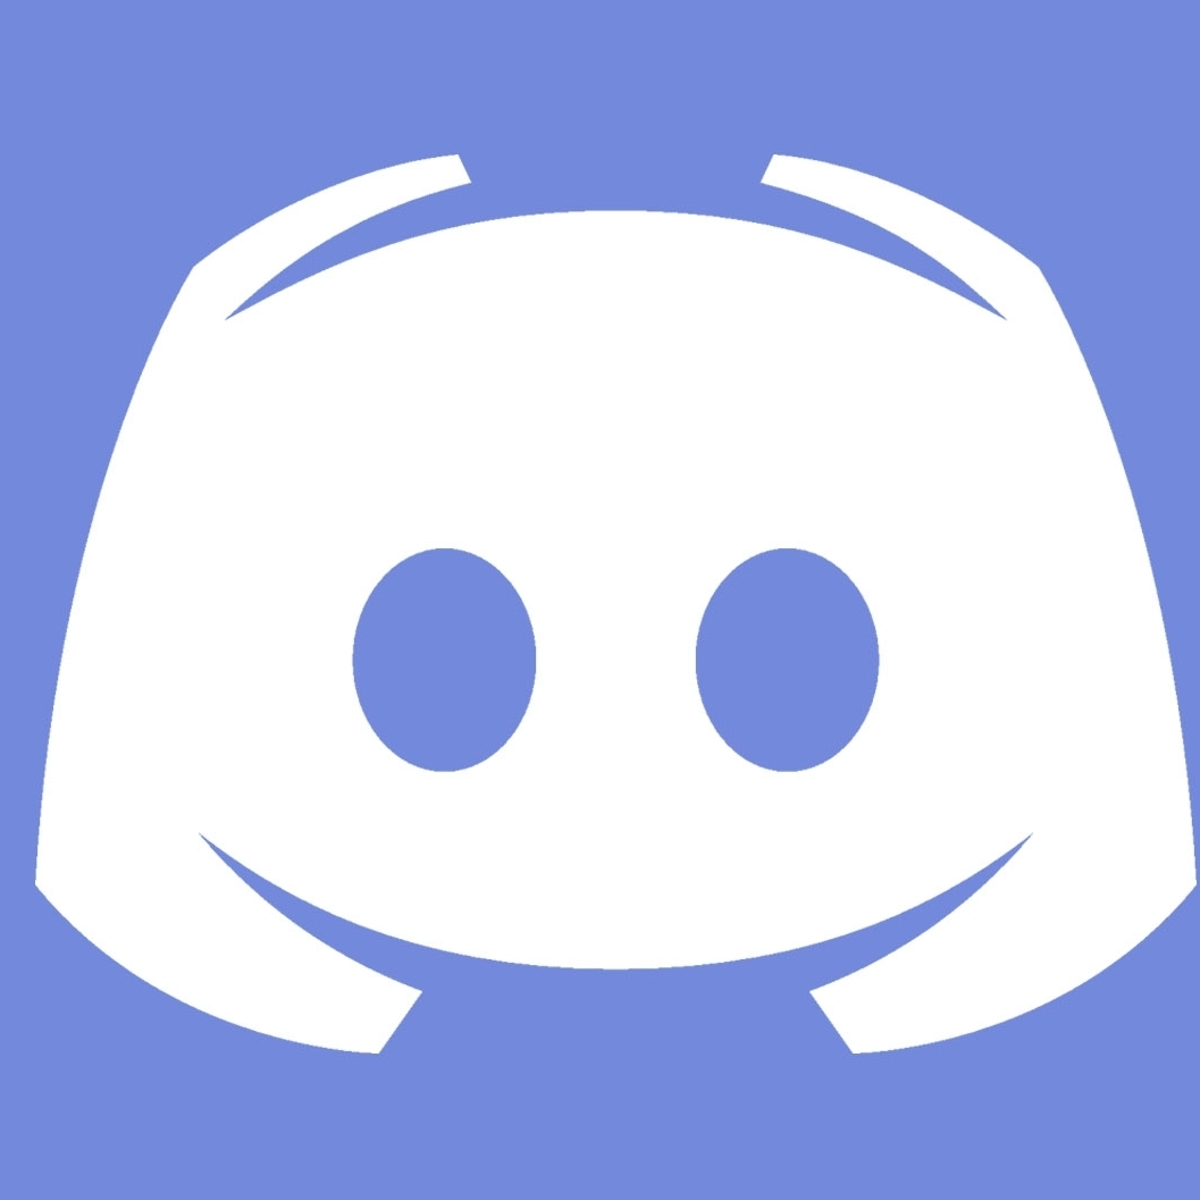 Discord rolls out voice messages